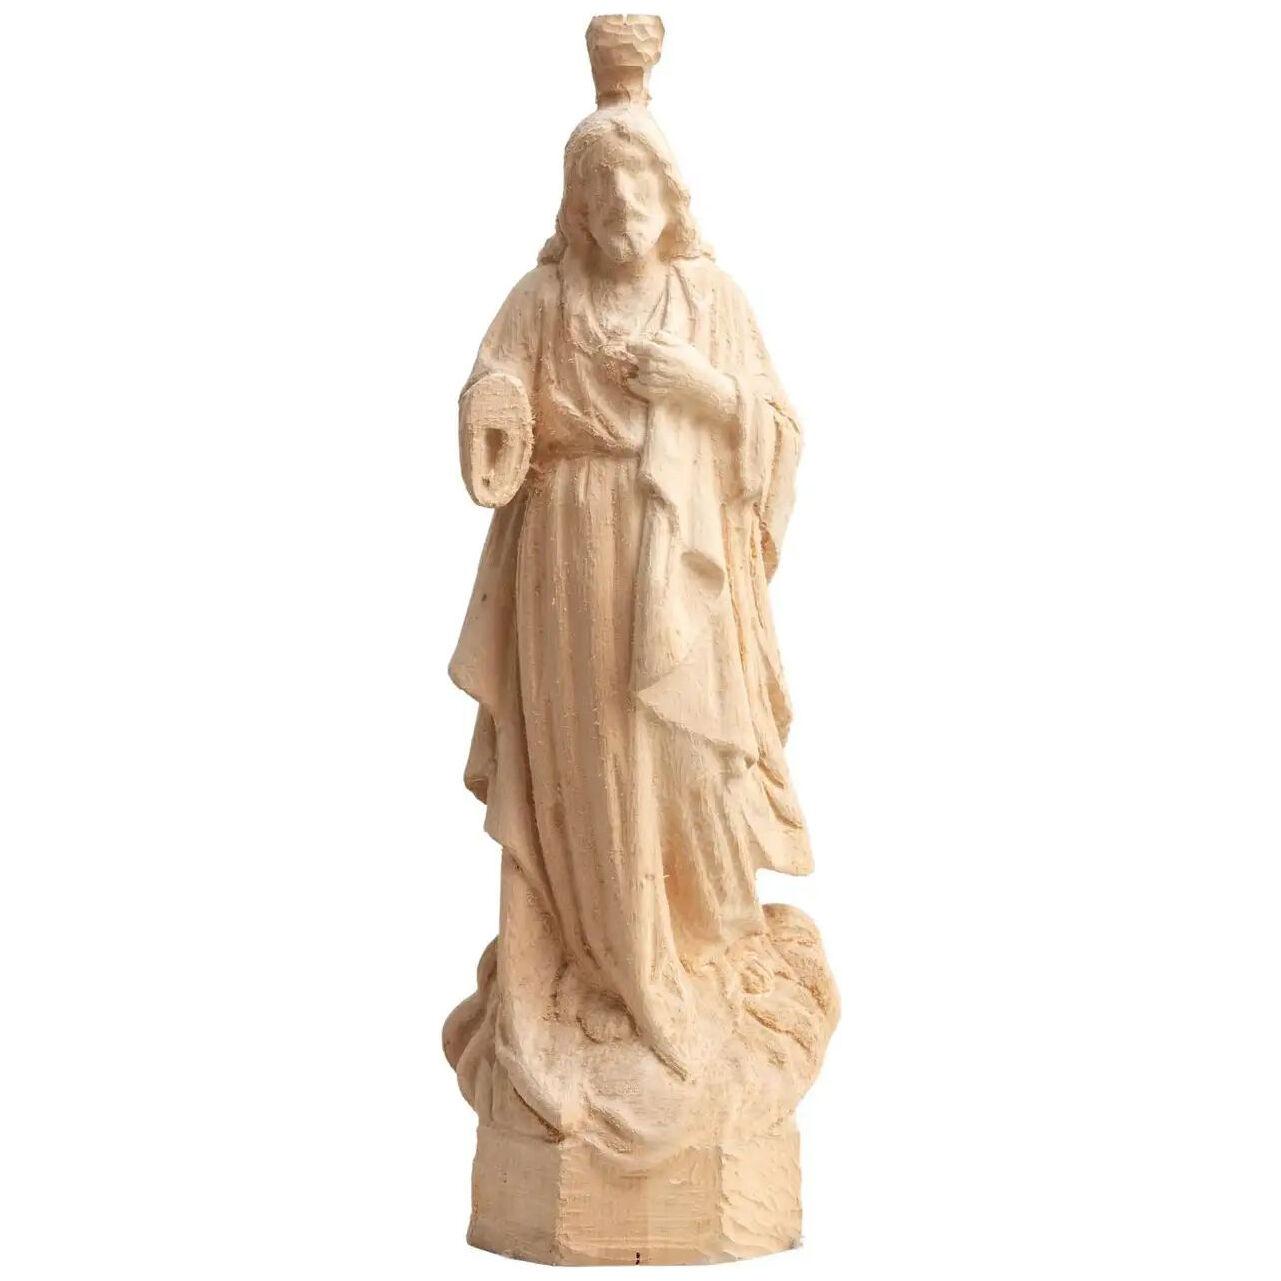 Traditional Religious Turned Jesus Christ Wooden Sculpture